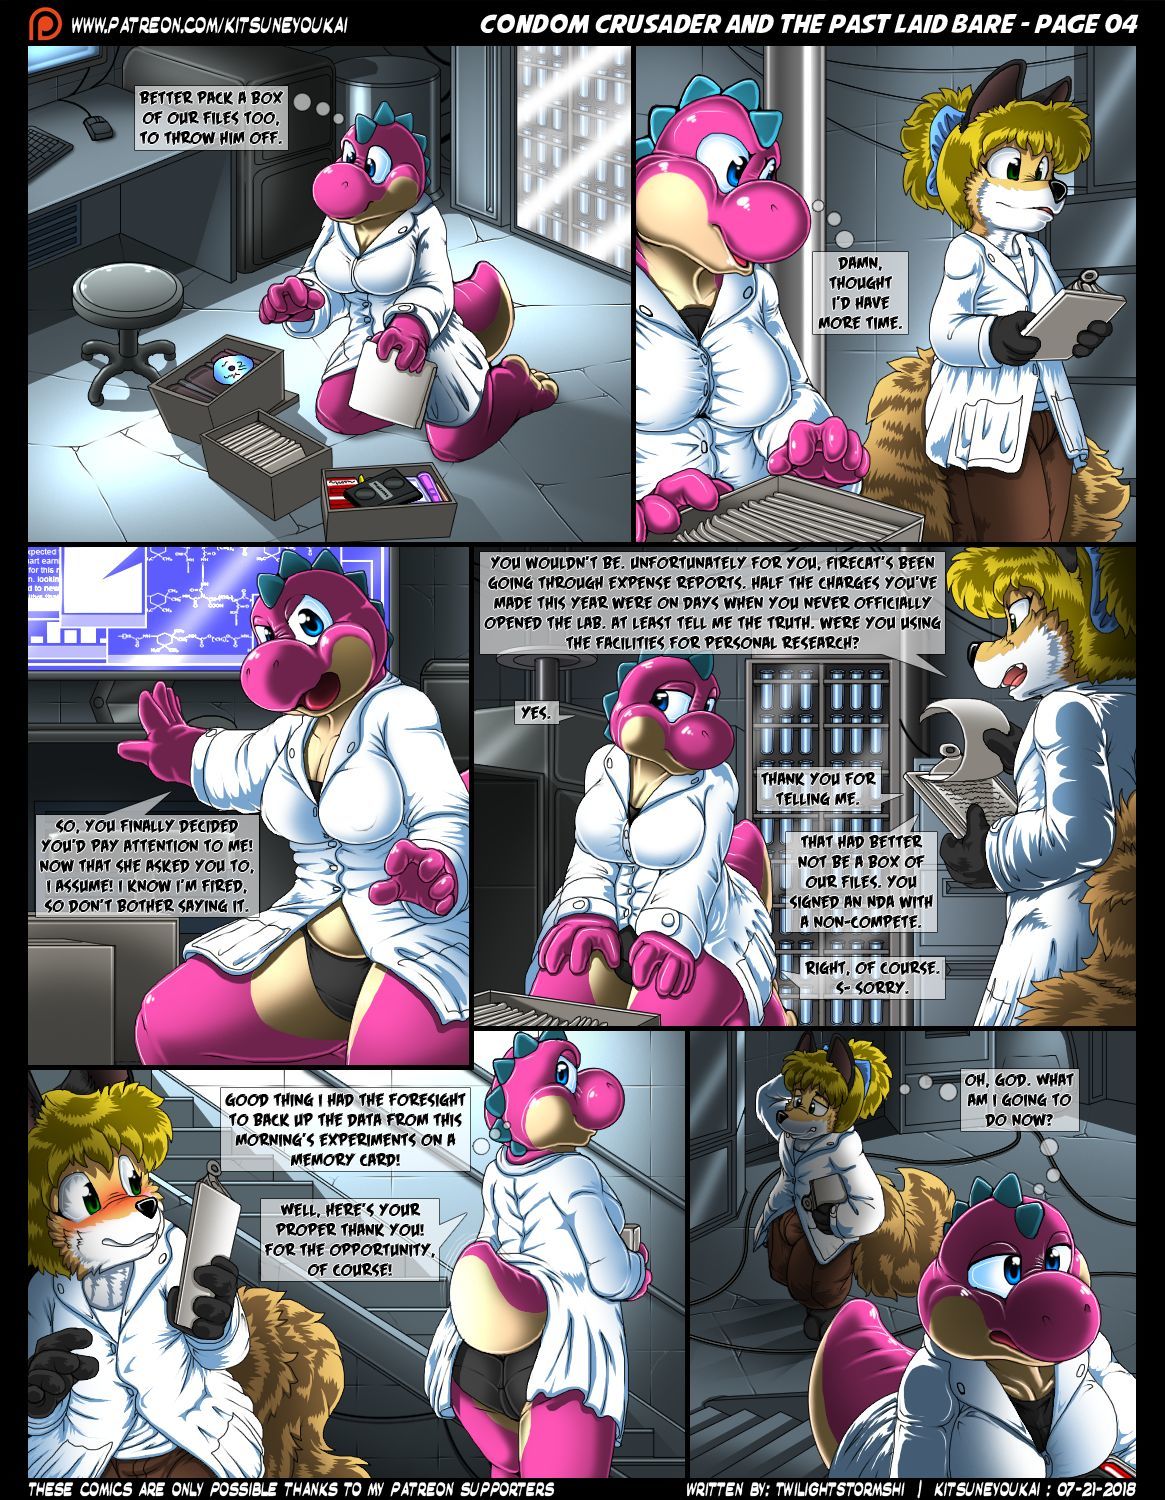 Condom Crusader and the Past Laid Bare by kitsuneyoukai page 4